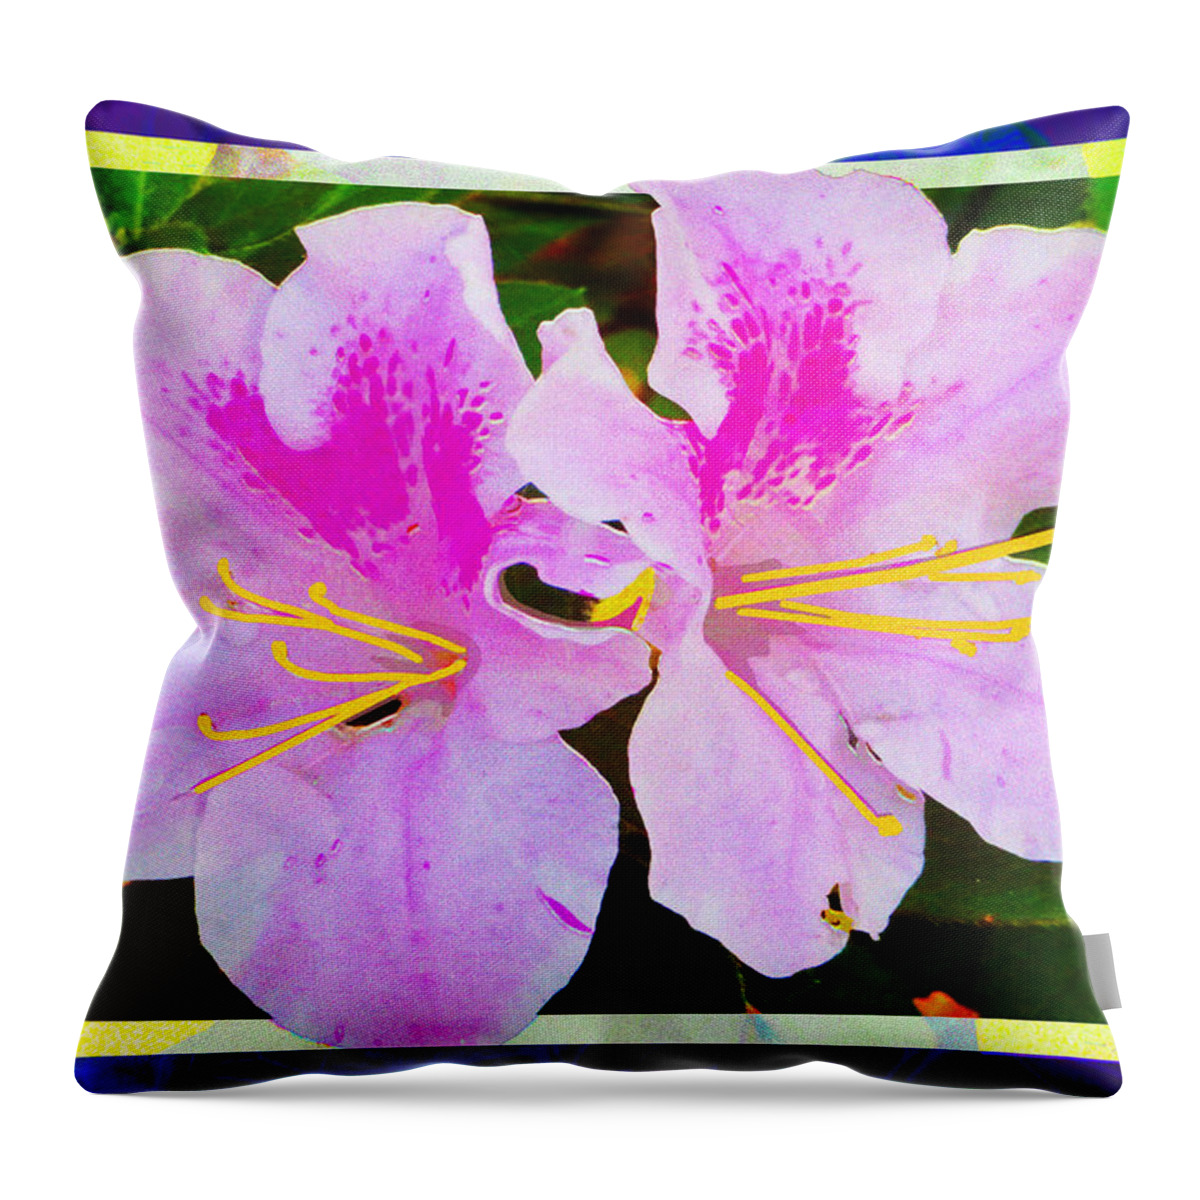 Arboretum Throw Pillow featuring the digital art Twin Blooms by Rod Whyte